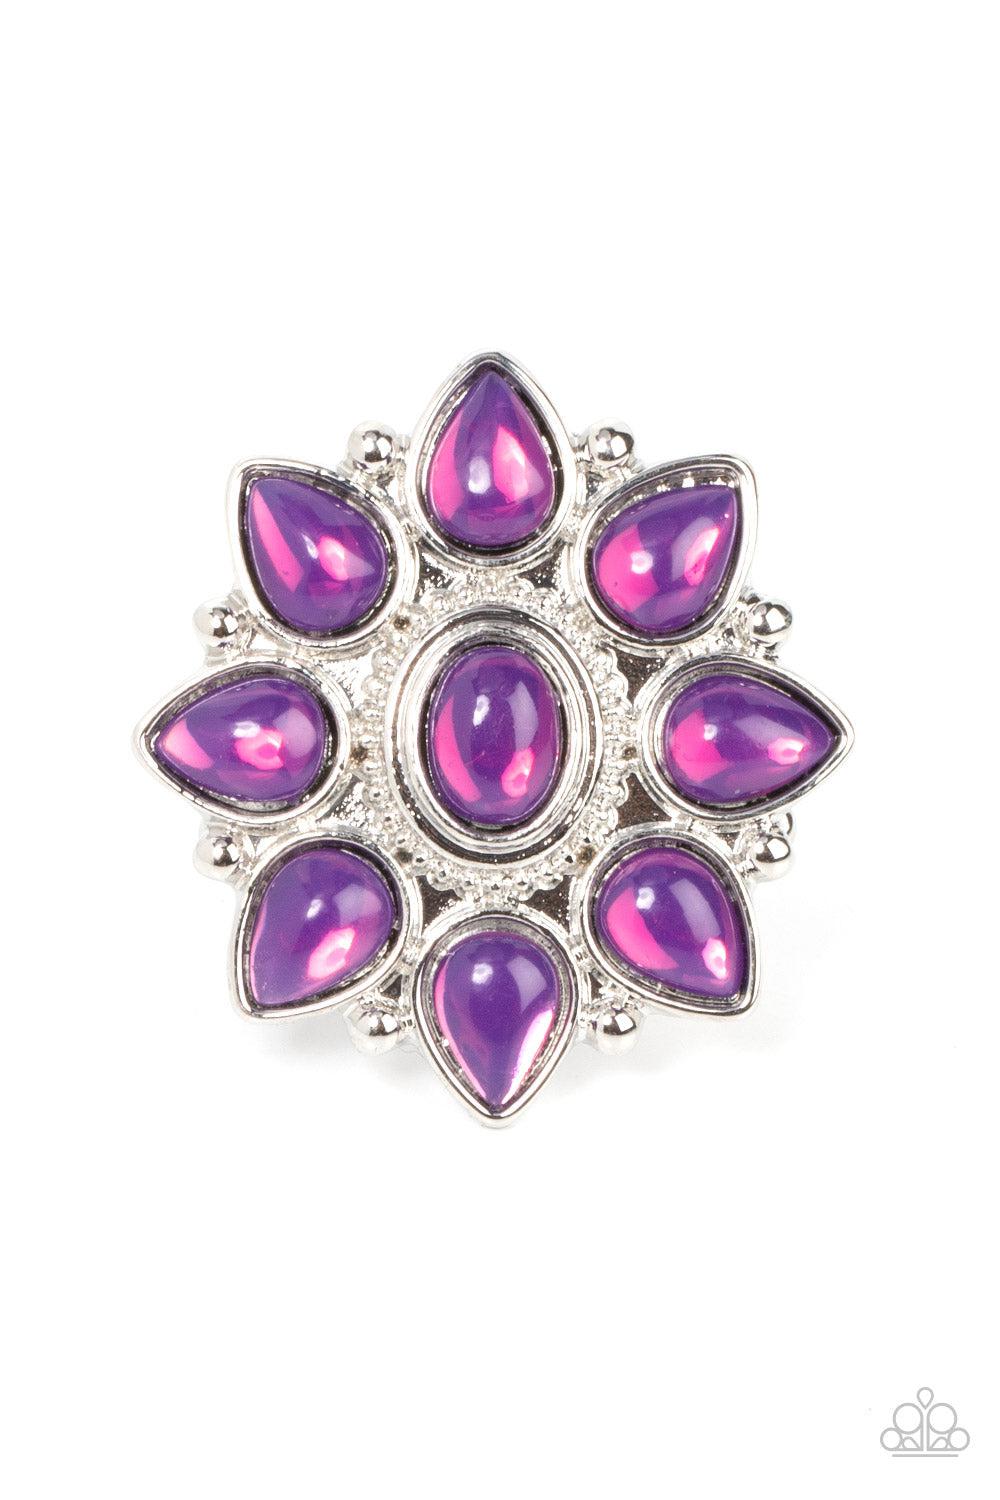 Enchanted Orchard Purple Flower Ring - Paparazzi Accessories- lightbox - CarasShop.com - $5 Jewelry by Cara Jewels